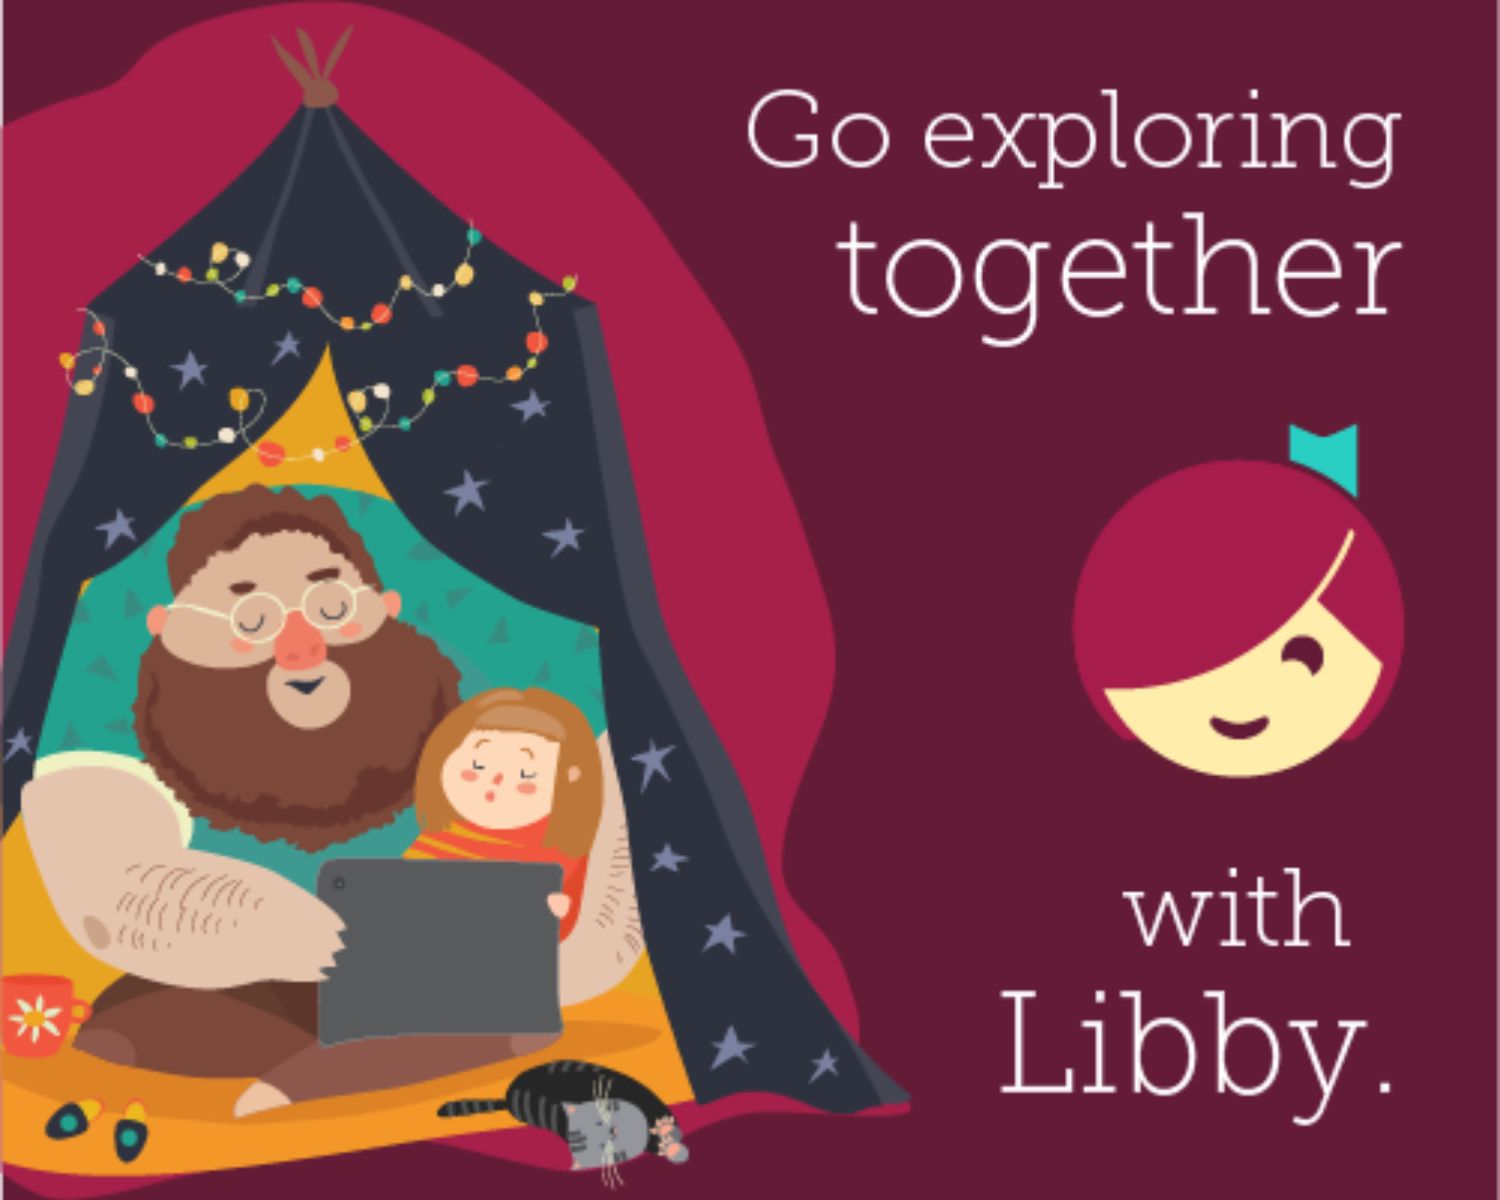 "Go exploring together with Libby" - graphic has an adult and child under a tent reading a book